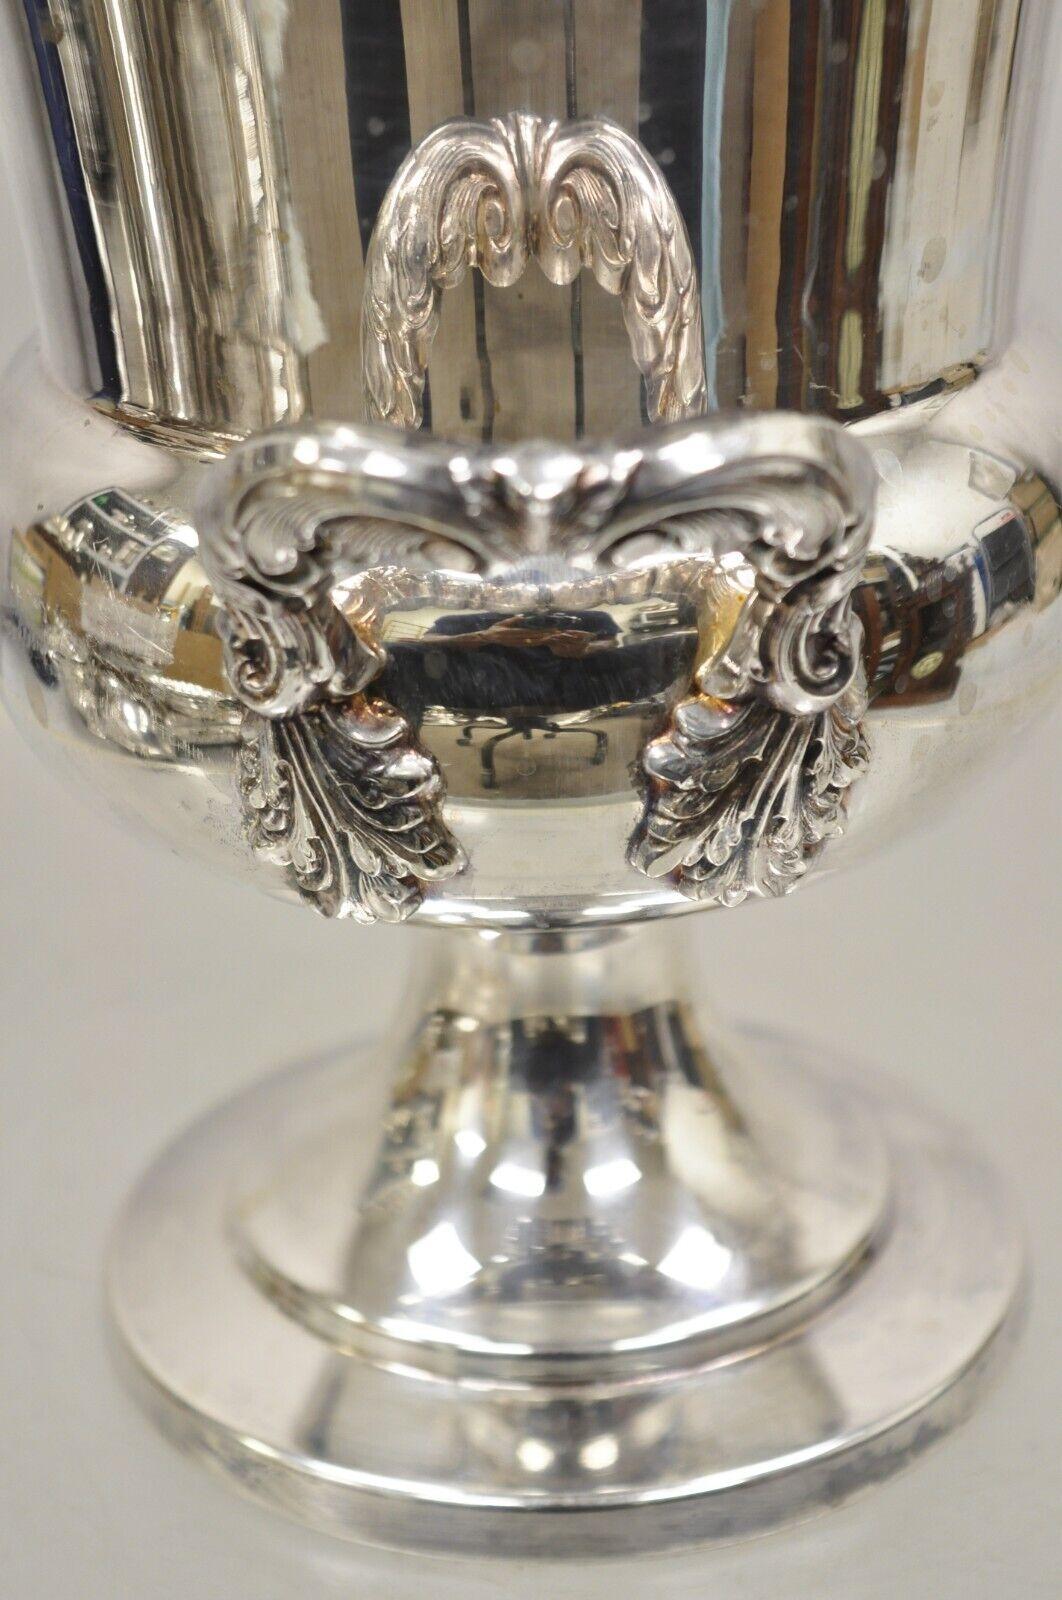 Vintage EPCA Silverplate by Poole 423 Trophy Cup Champagne Chiller Ice Bucket For Sale 1